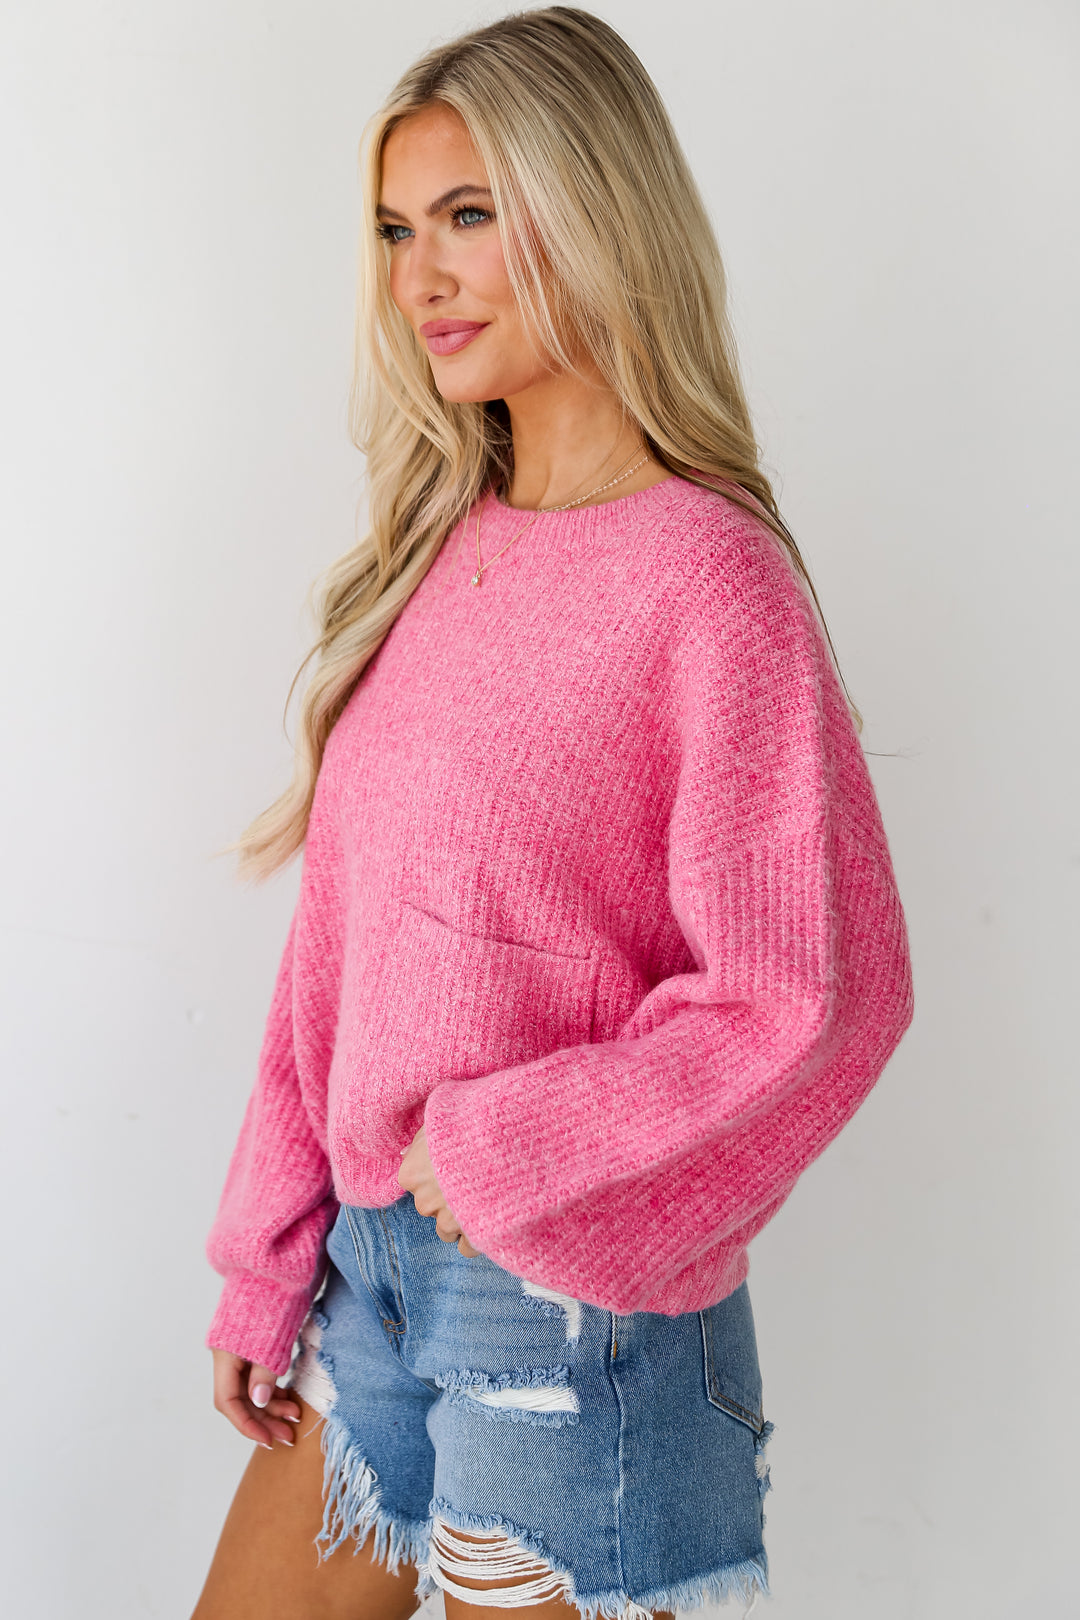 cozy pink sweater